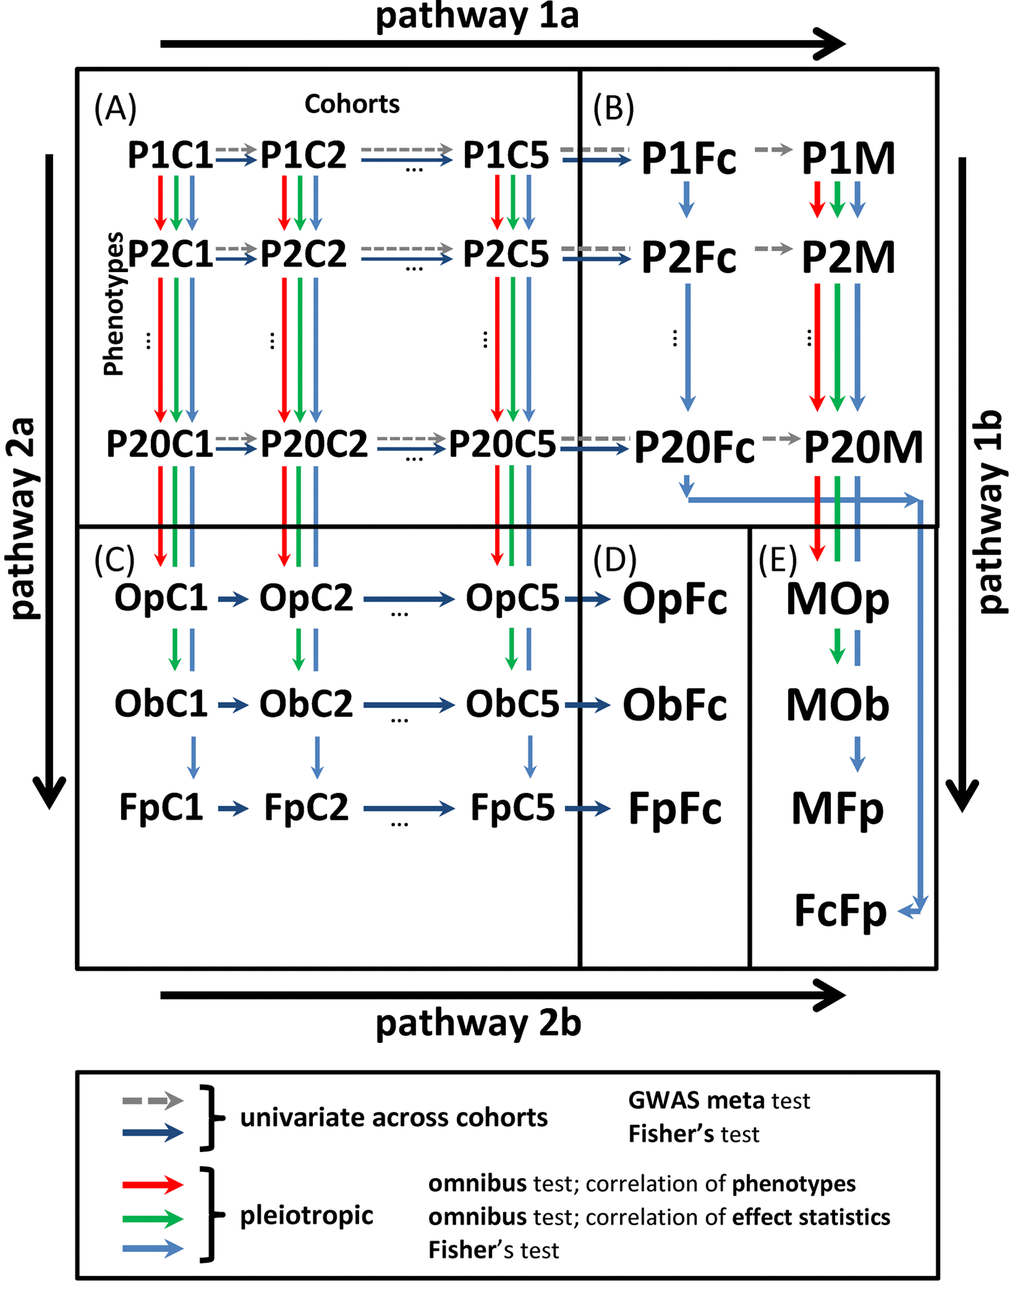 Scheme of univariate and pleiotropic meta-analyses in stage 2. (A) Statistics from stage 1 univariate GWAS of 20 phenotypes in five cohorts denoted PiCj, i∈1,20- and j∈1,5-. (B) Univariate statistics from the meta-analysis across cohorts using the fixed-effects meta-test (PiM) and Fisher test (PiFc). (C) Statistics from the pleiotropic meta-analysis across phenotypes in cohort j for: (i) omnibus tests with correlation matrix for phenotypes ΣjP (OpCj) and effect statistics ΣjB (ObCj) and (ii) Fisher test (FpCj). (D) Meta-statistics from Fisher test across cohorts for the results in (C) (OpFc, ObFc, and FpFc). (E) Meta-statistics across phenotypes for the results in (B) from (i) meta-test across cohorts and omnibus test across phenotypes with correlation matrix for phenotypes ΣmP (MOp), (ii) meta-test across cohorts and omnibus test across phenotypes with correlation matrix for effect statistics ΣmB (MOb), (iii) meta-test across cohorts and Fisher test across phenotypes (MFp), and (iv) Fisher test across cohorts and Fisher test across phenotypes (FcFp). Pathway 1: meta-analysis combining statistics across cohorts (pathway 1a) and pleiotropic meta-analysis across phenotypes (pathway 1b). Pathway 2: meta-analysis combining statistics across phenotypes (pathway 2a) and cohorts (pathway 2b).